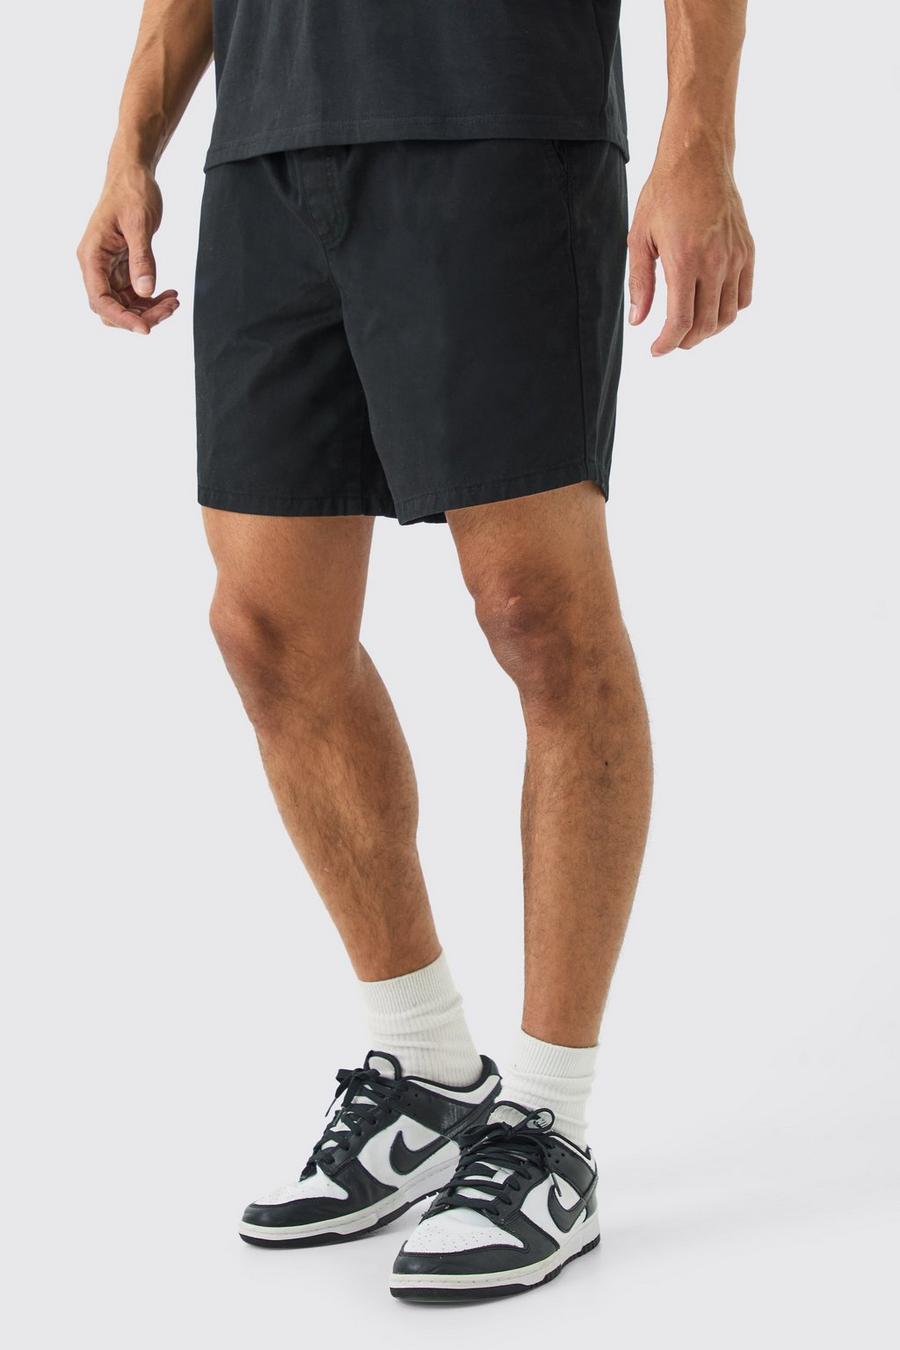 Shorter Length Relaxed Fit Elastic Waist Chino Shorts in Black